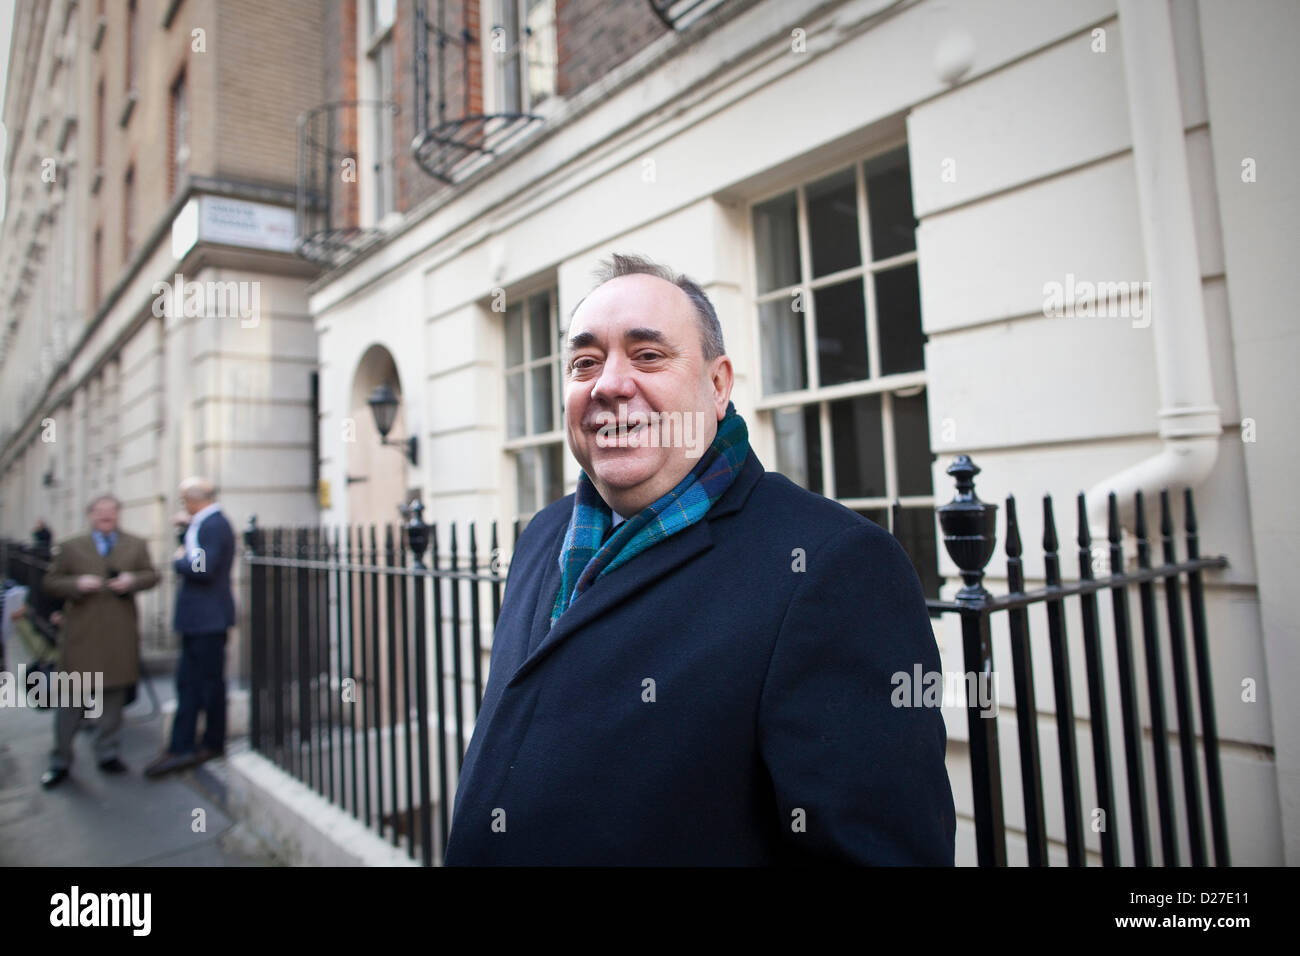 London, UK. 16th January 2013.   Picture shows Alex Salmond, First Minister of Scotland along the street in central London, UK after speaking at the Foreign Press Association. Credit:  Jeff Gilbert / Alamy Live News Stock Photo